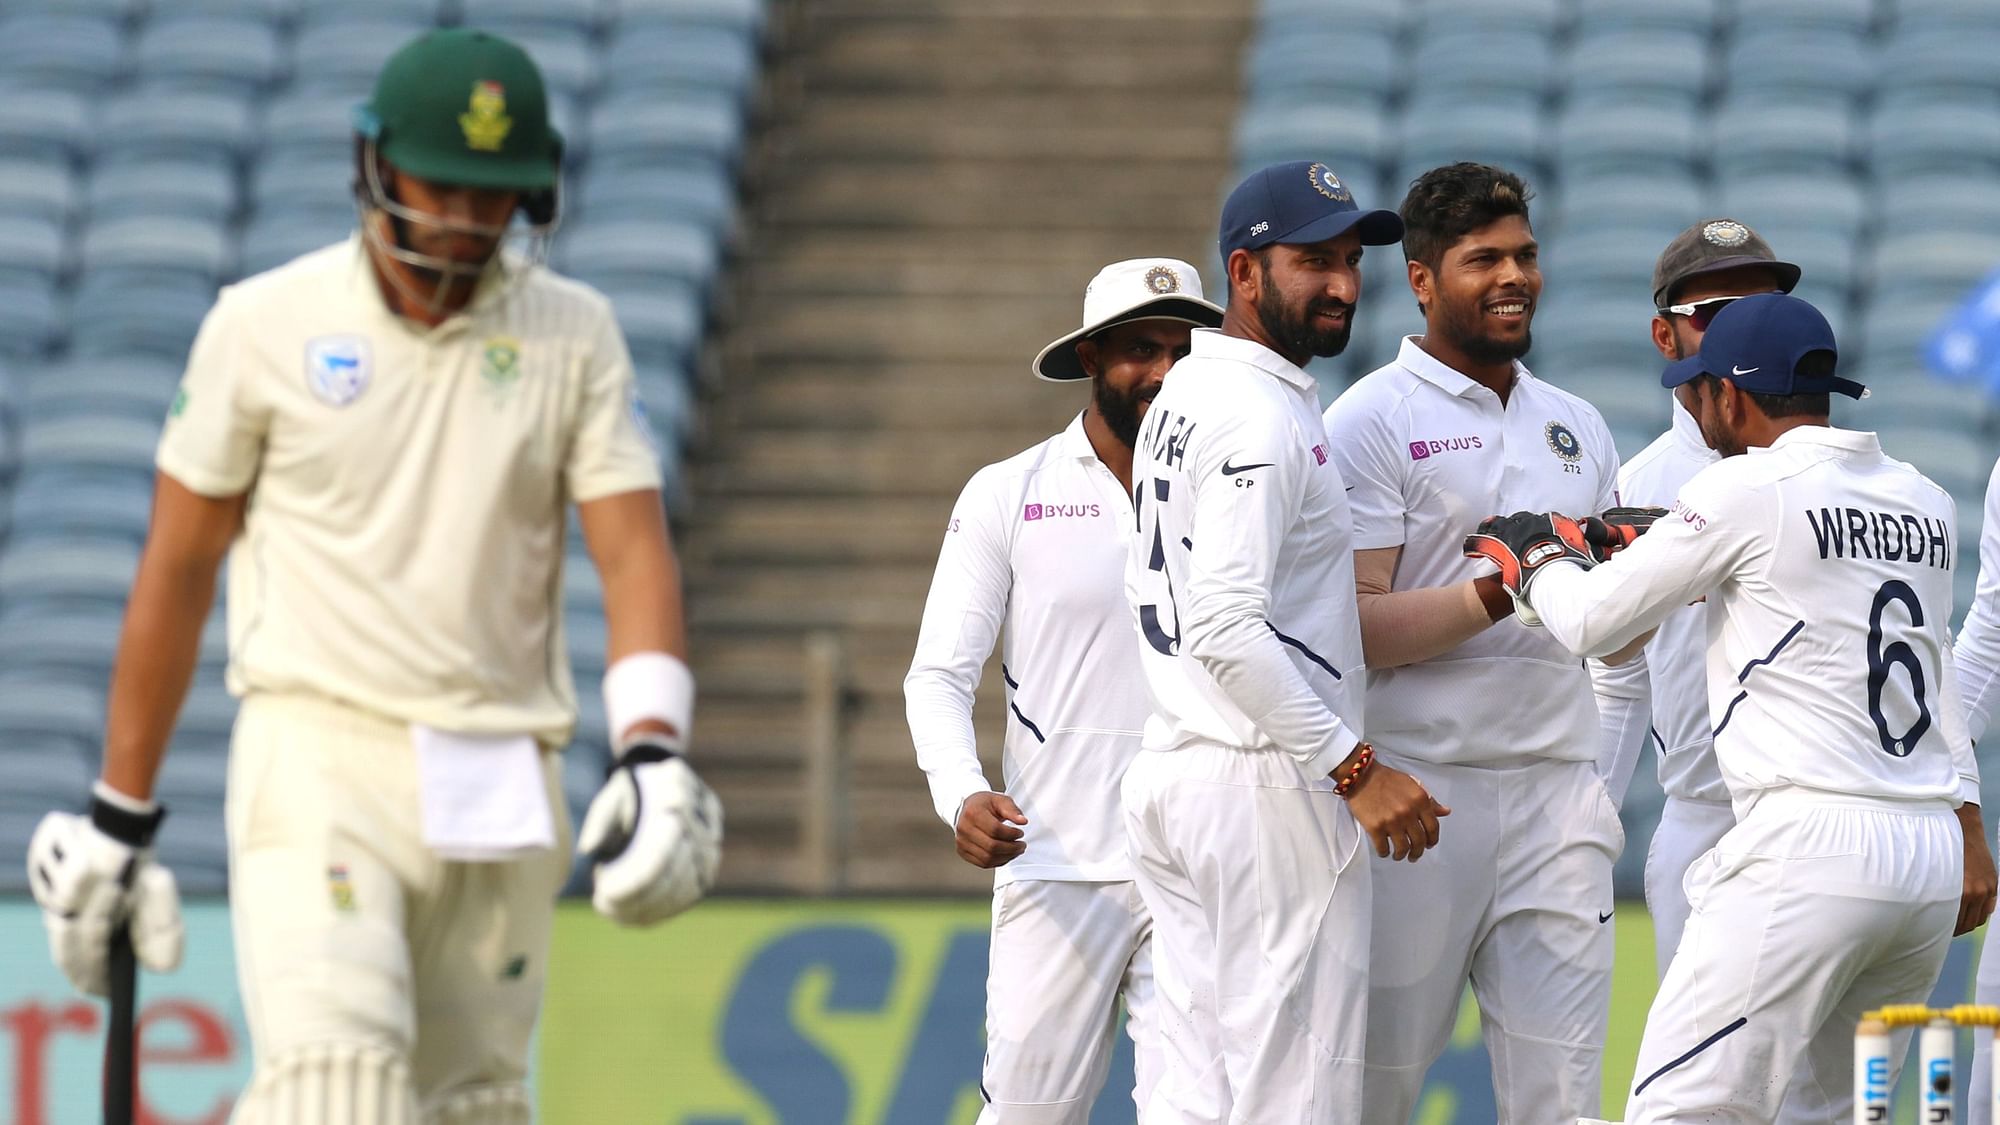 Live updates from the India vs South Africa Test at Pune. India won the series opener in Vizag on Sunday and this is the second match of the series.